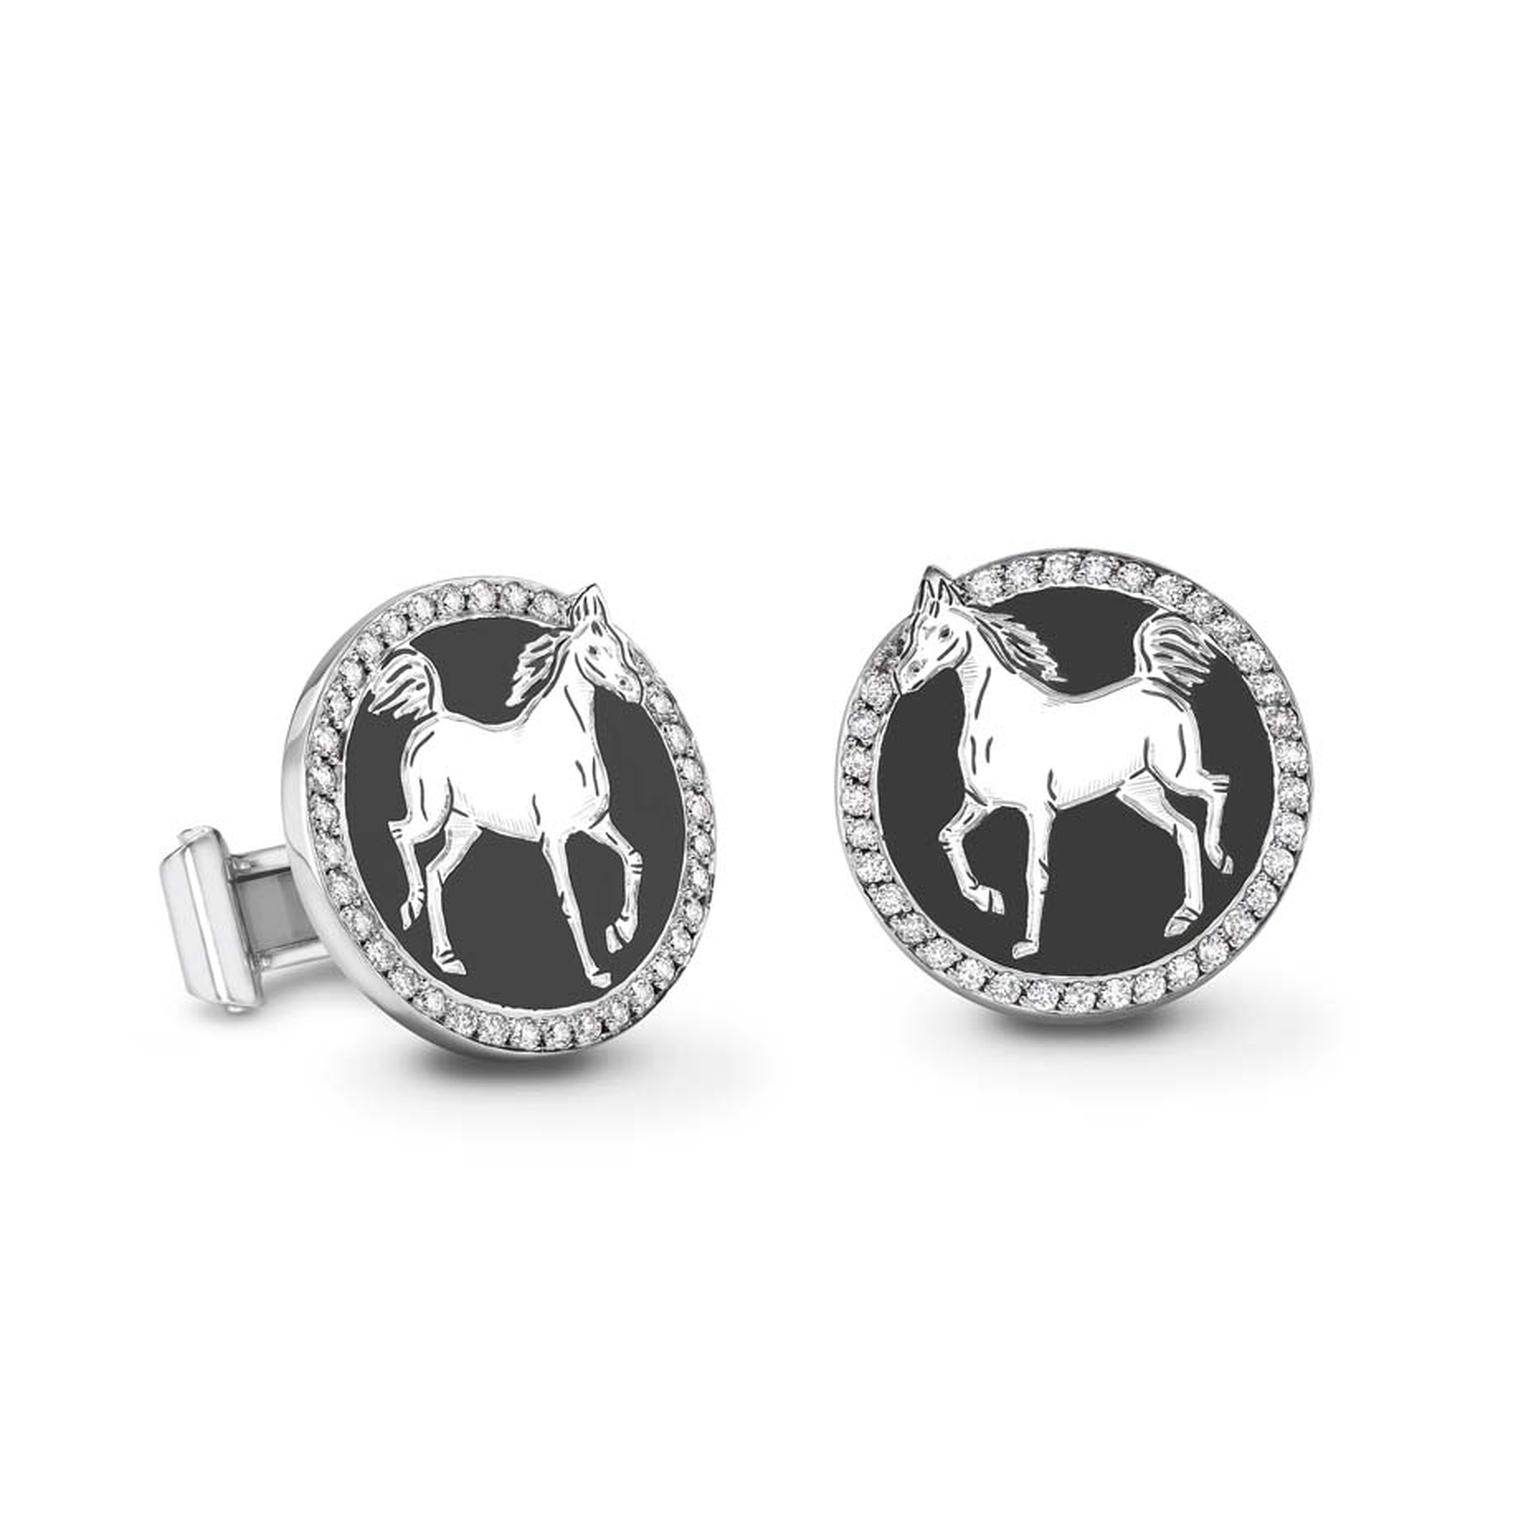 Theo Fennell pays homage to the Year of the Horse with hand-painted enamel cufflinks set with a circle of diamonds (£4,250).